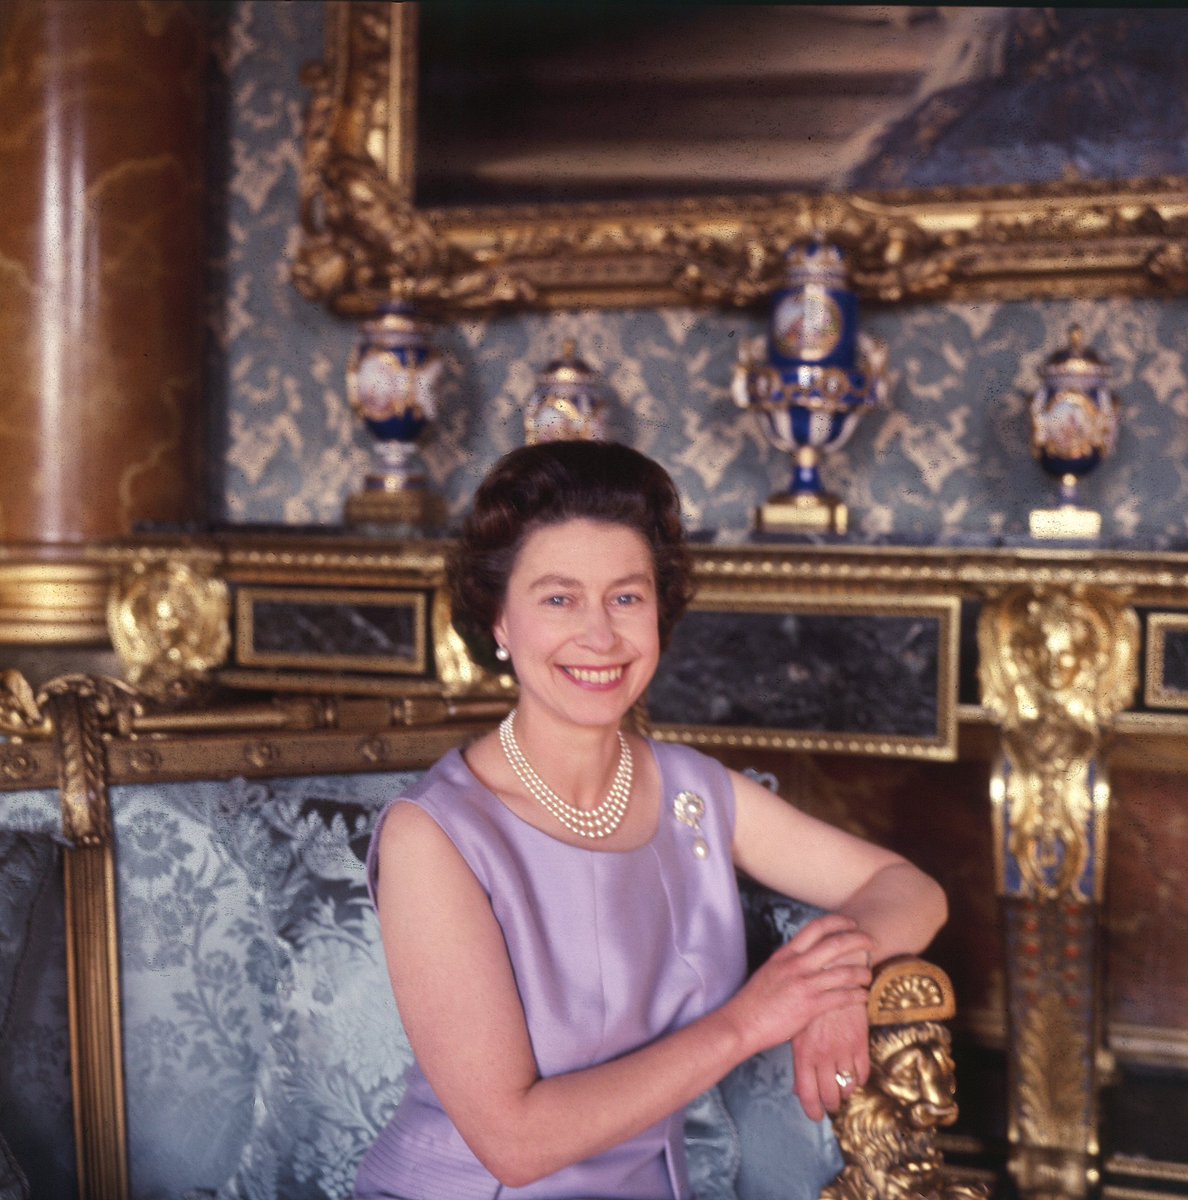 In loving and everlasting memory. Her Majesty Queen Elizabeth II, 21st April 1926 – 8th September 2022.